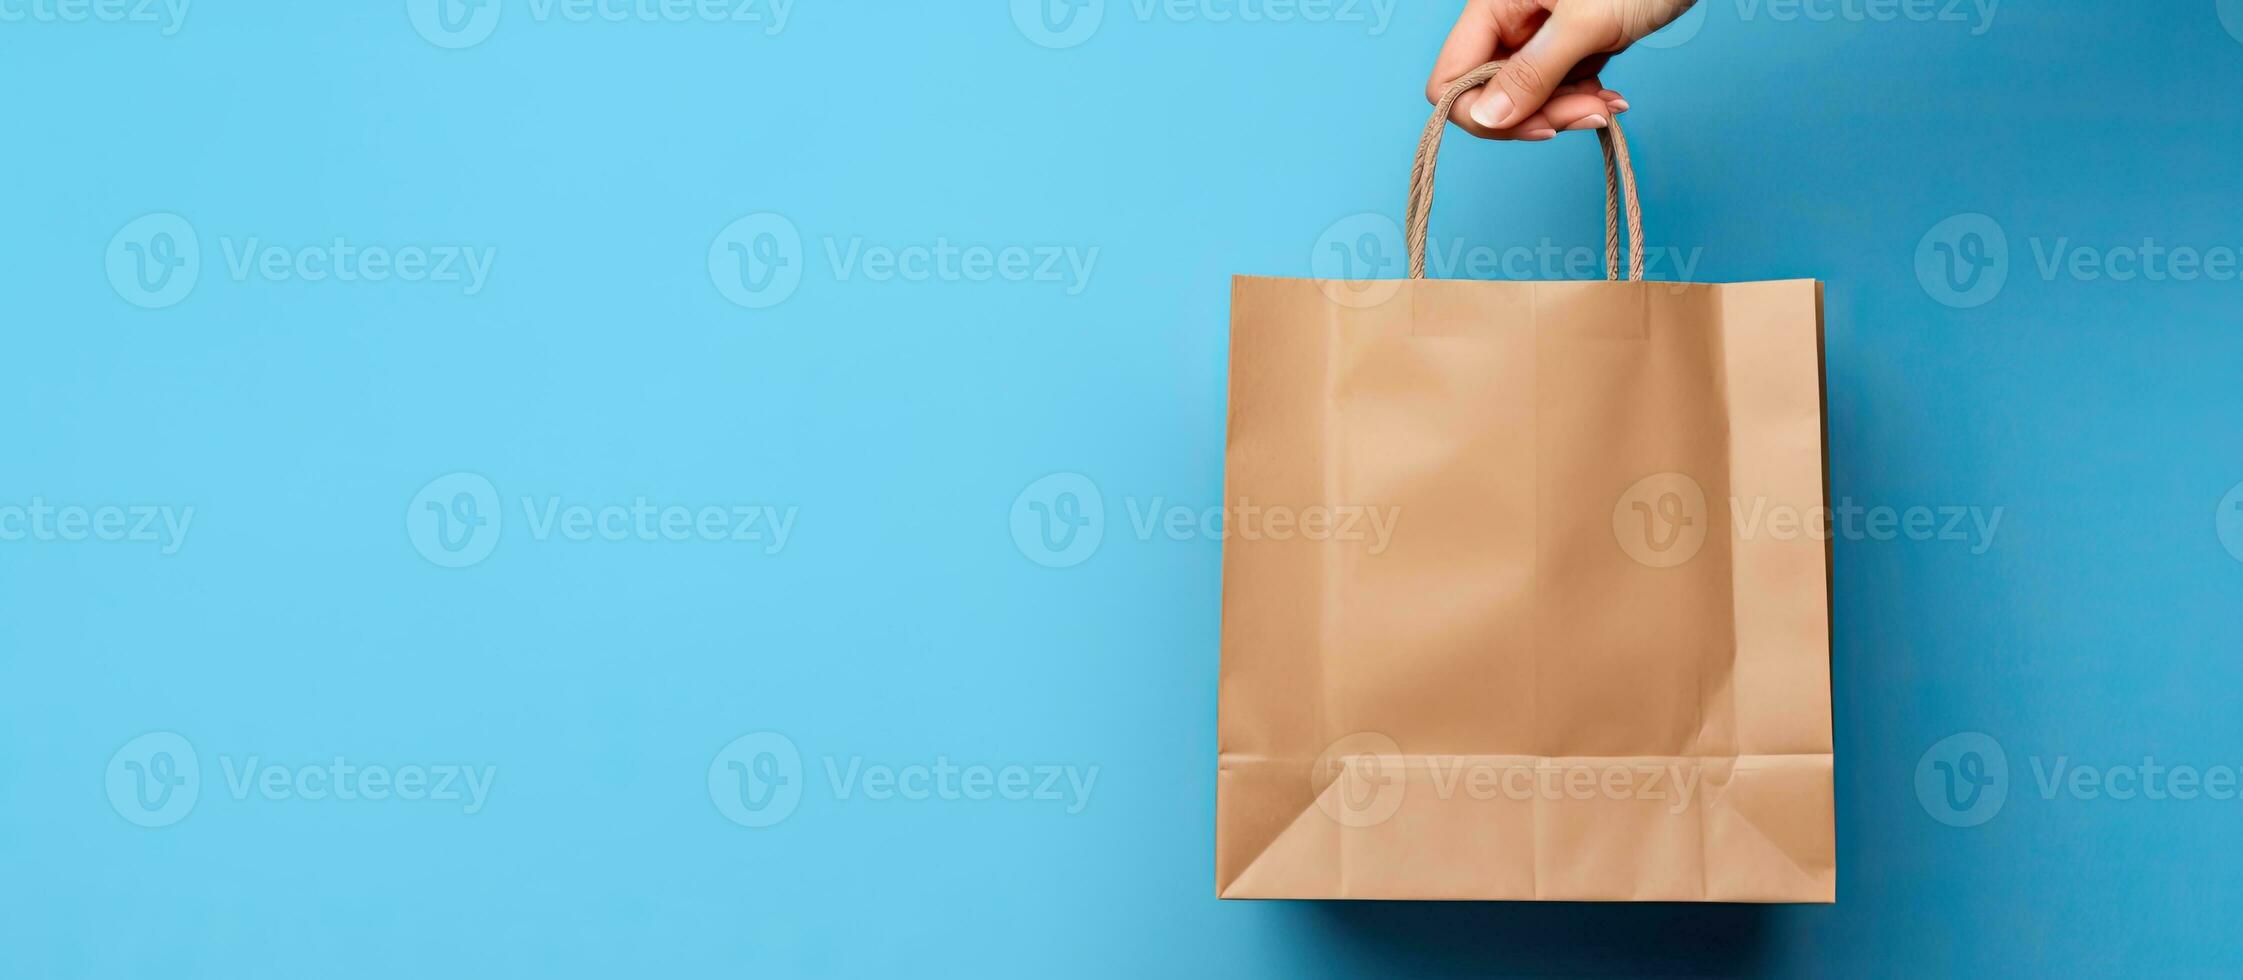 Female hand holding brown paper bag with food products isolated on blue wall background Delivery service concept Mock up for advertising photo